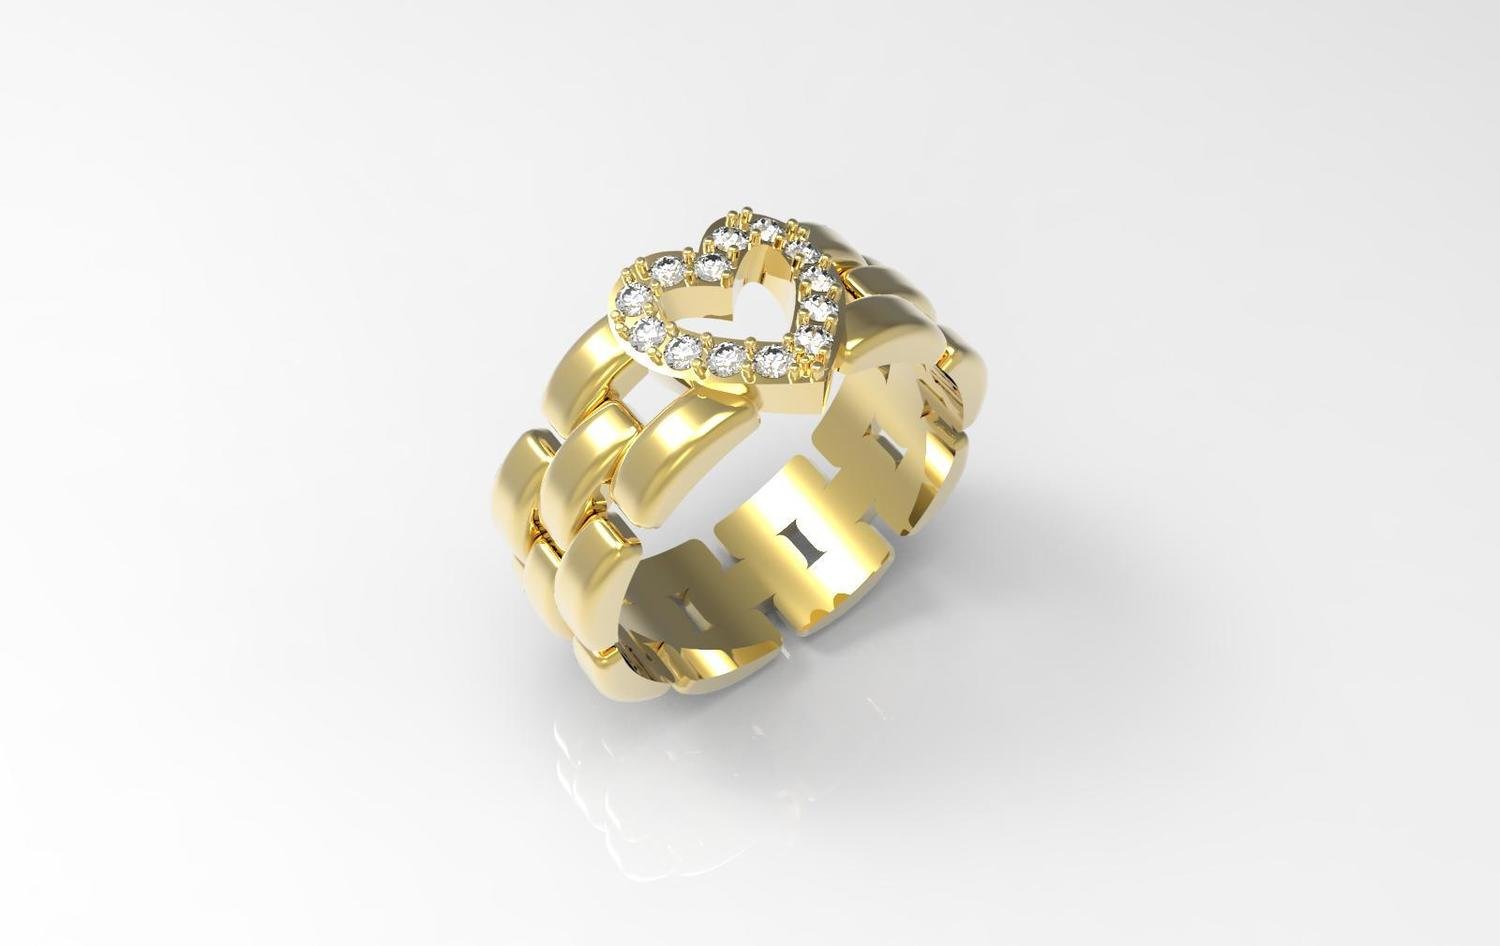 3D CAD Model of Wedding Ring with Diamonds